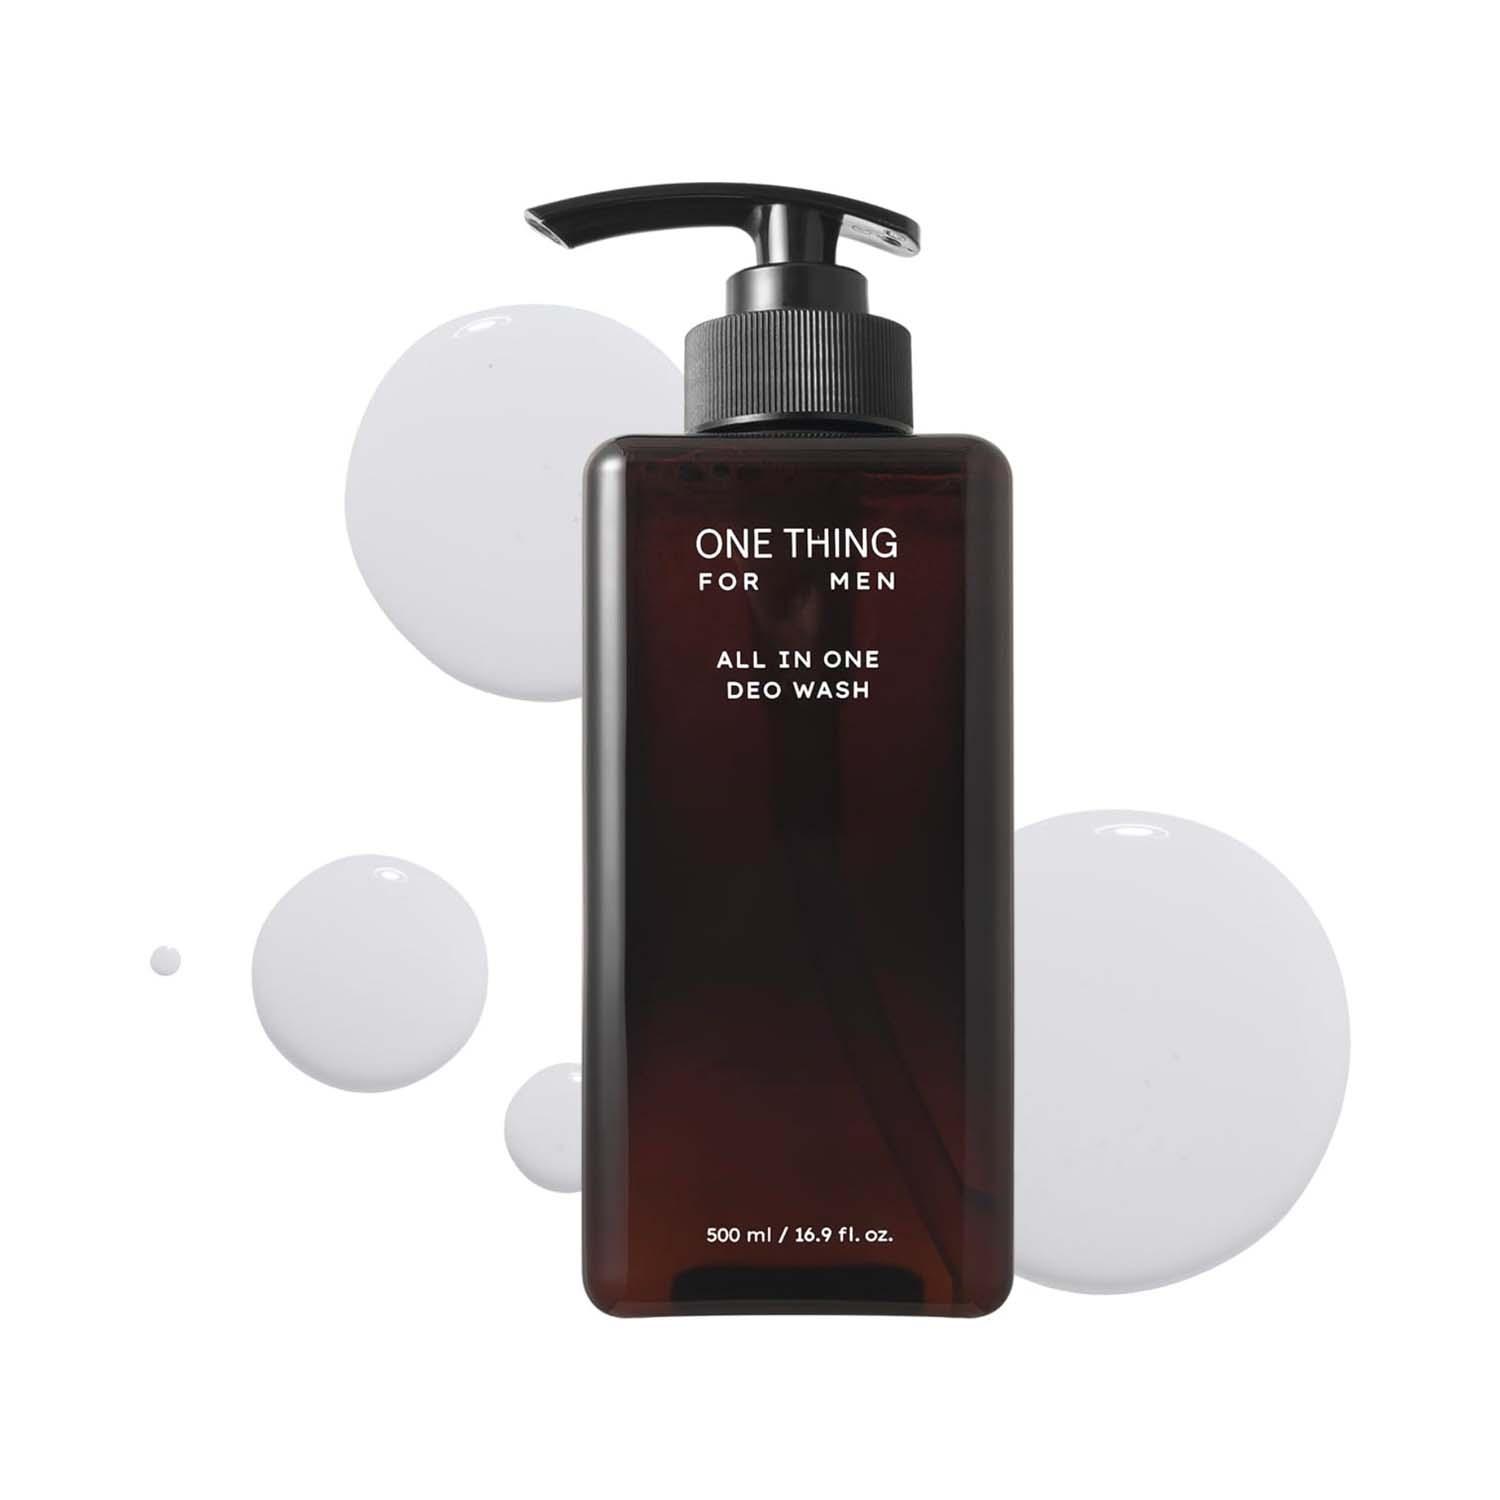 ONE THING | ONE THING For Men All In One Deo Wash (500 ml)